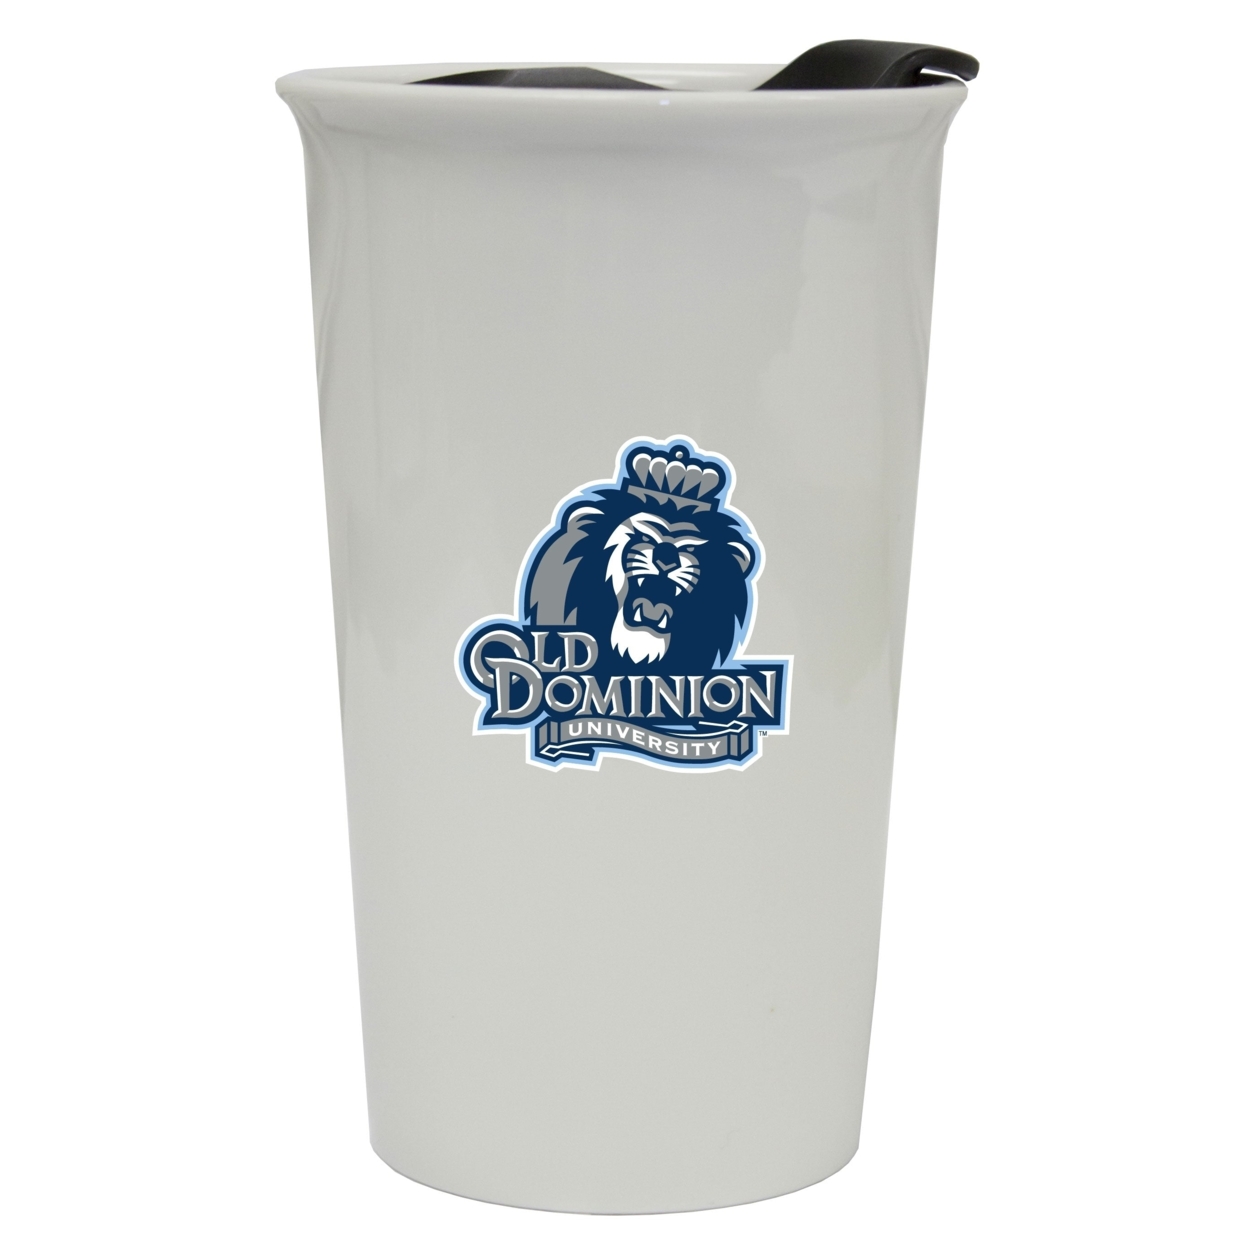 Old Dominion University Double Walled Ceramic Tumbler